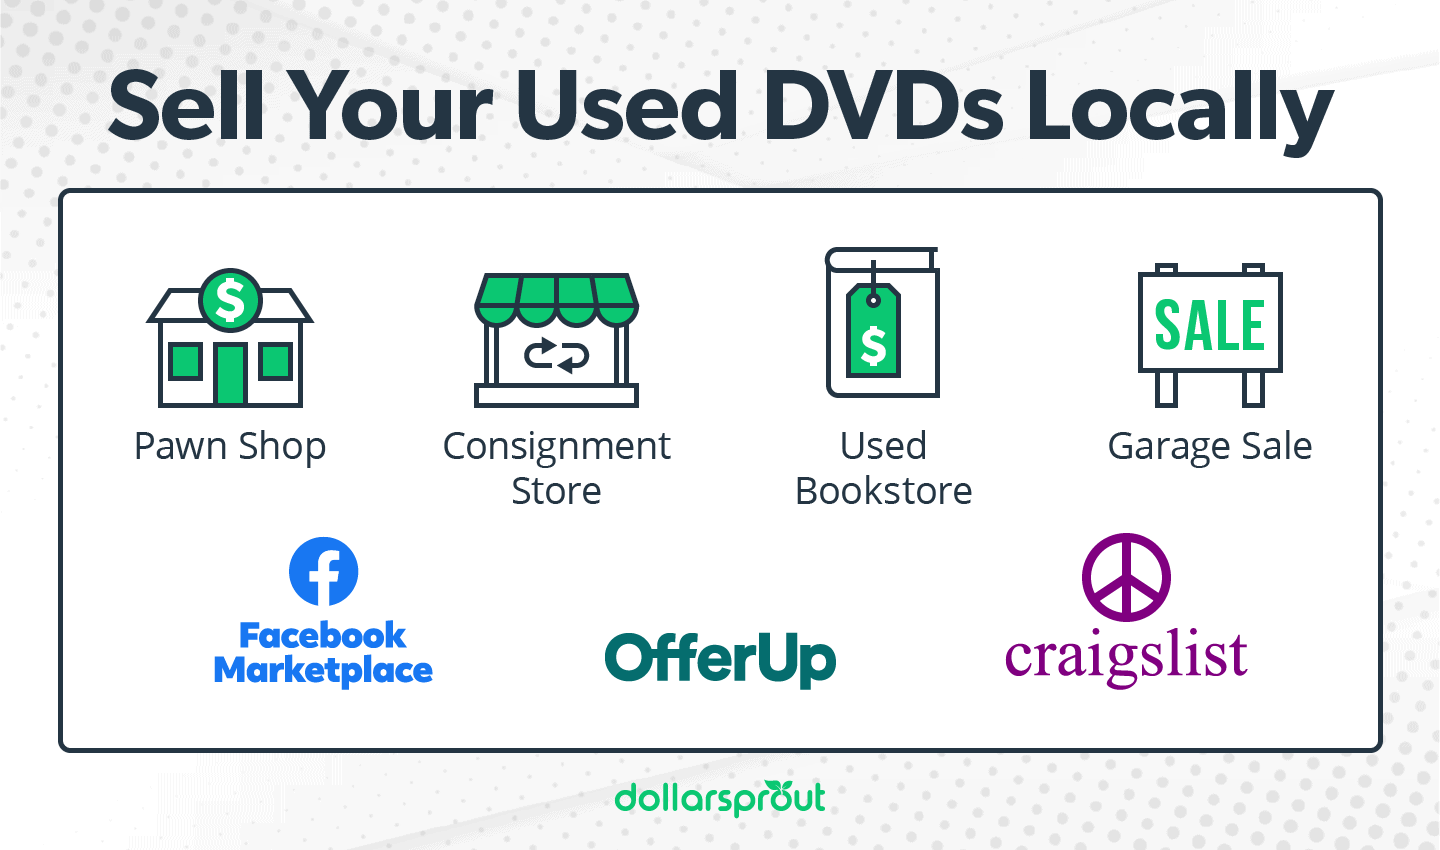 Sell Your Used DVDs Locally